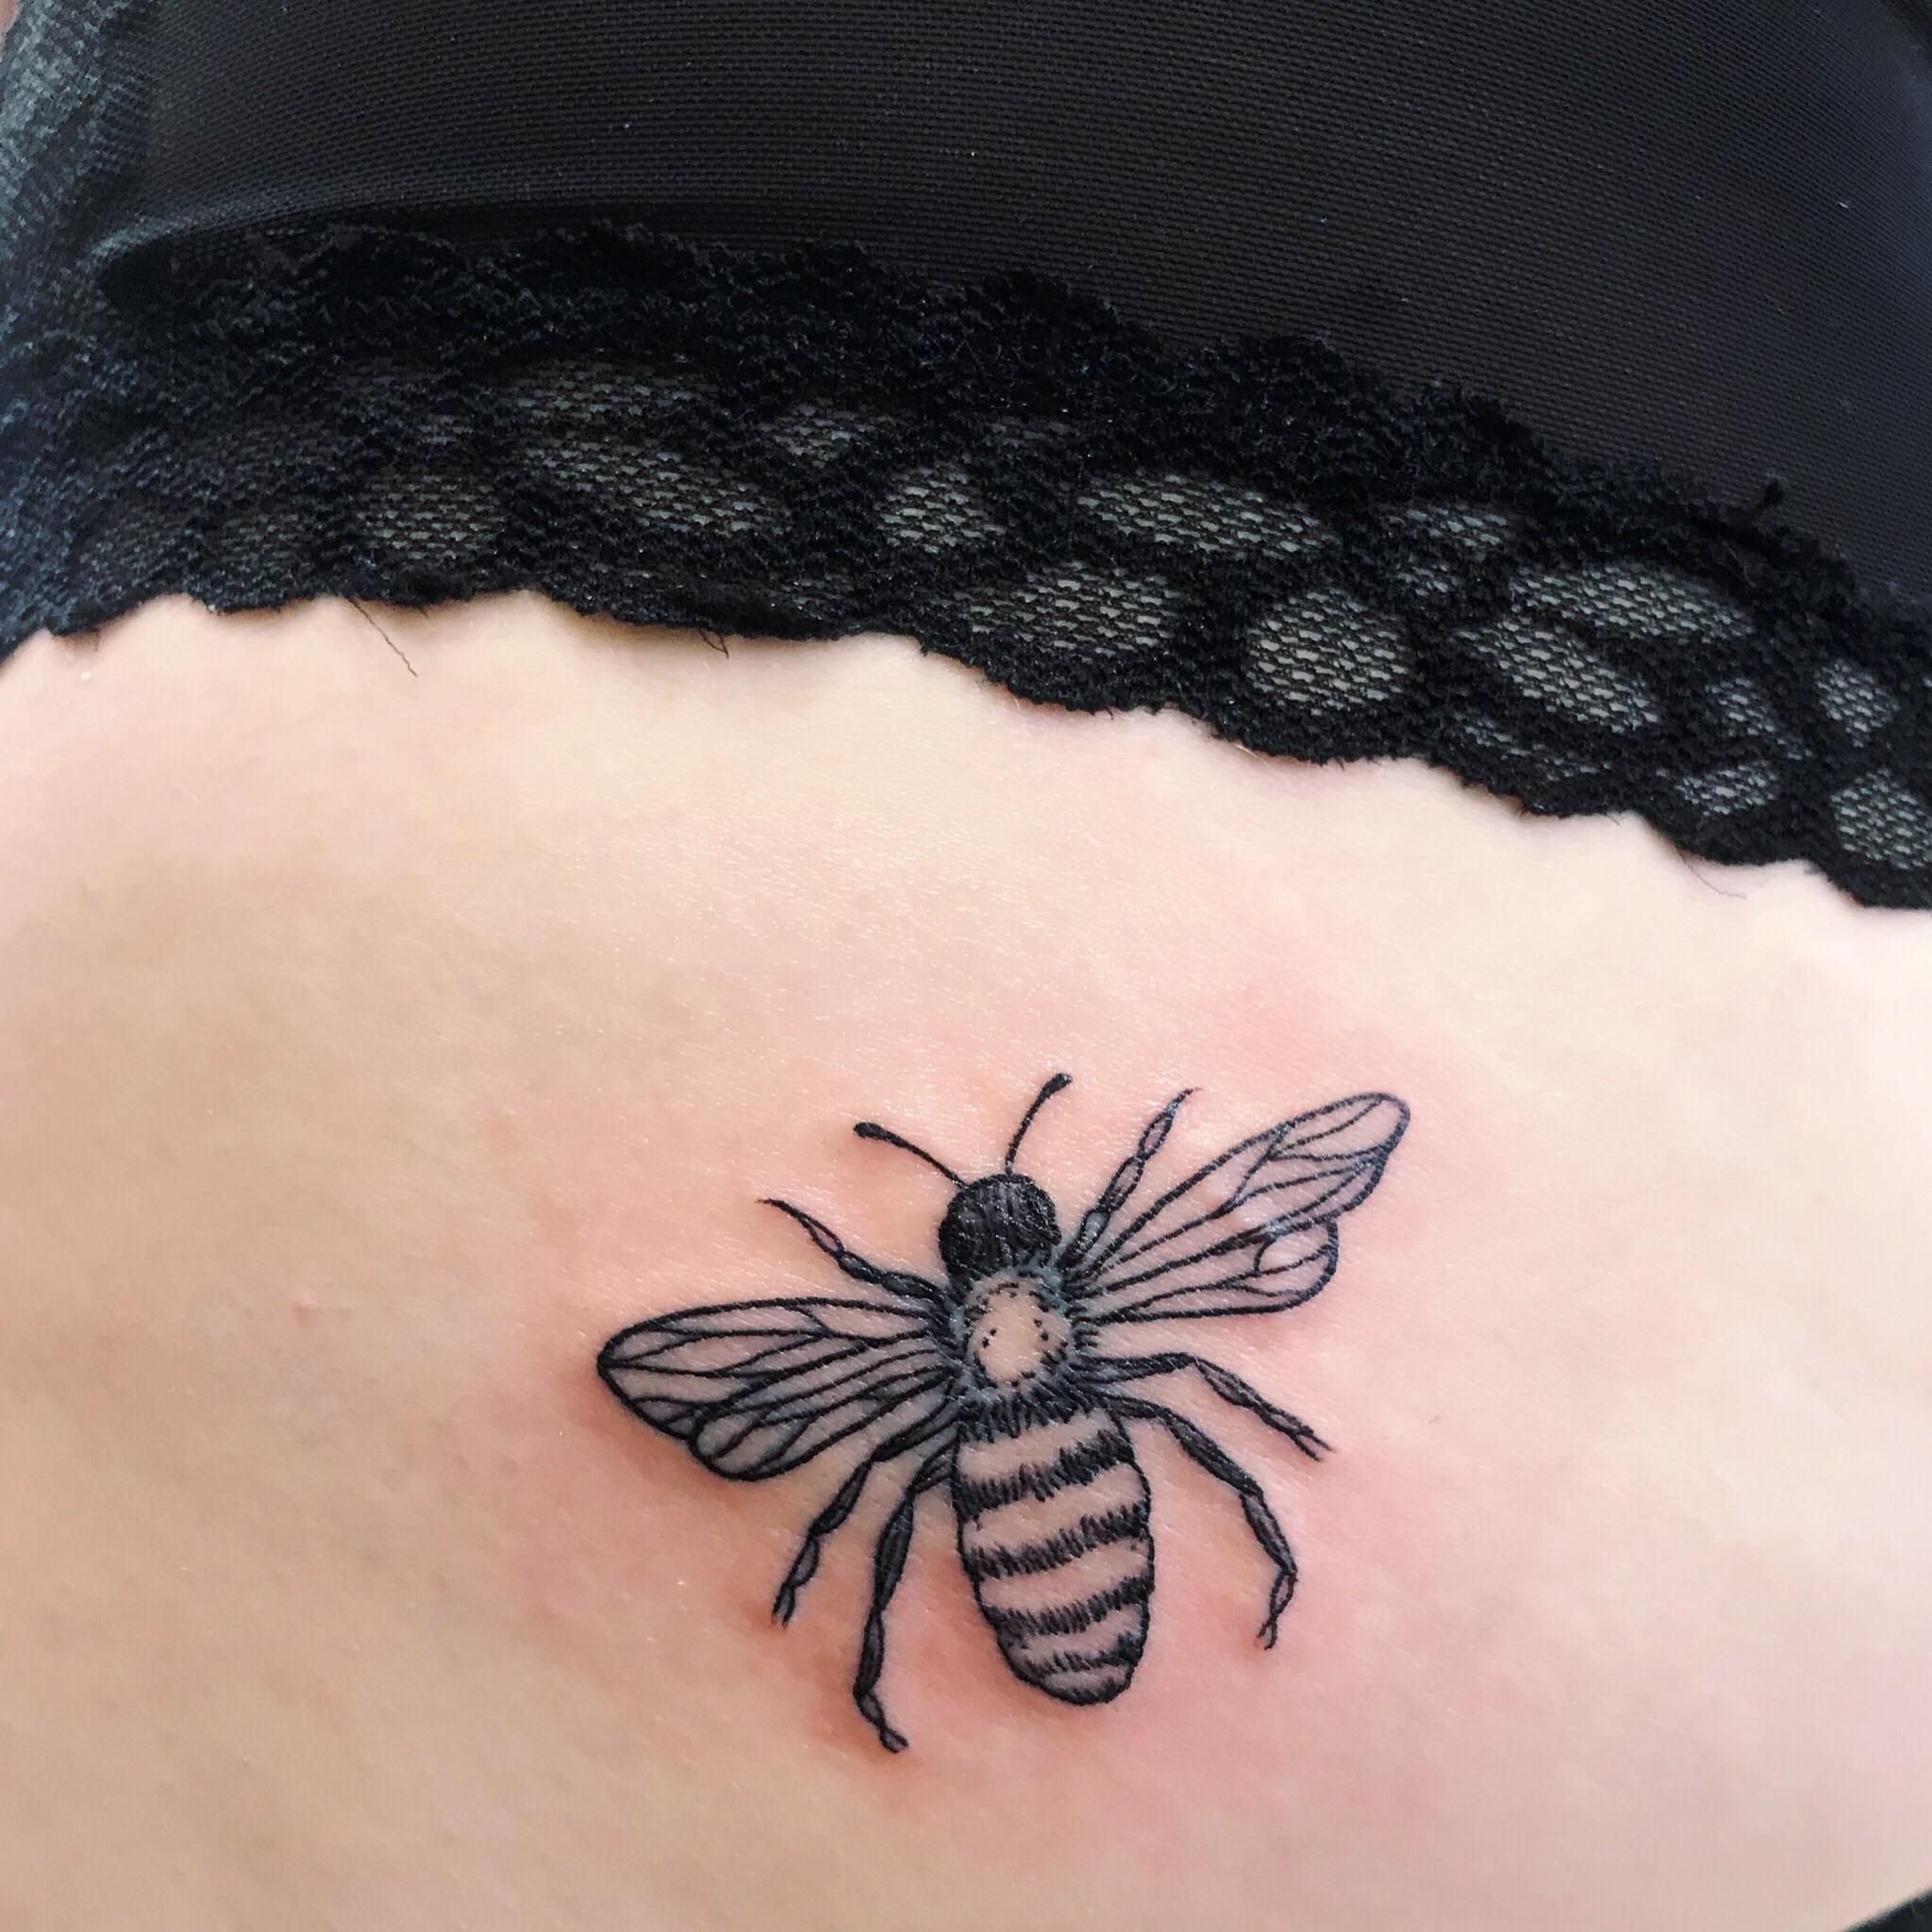 Bee Tattoo Meaning Mental Health: Its Benefits for Mental Health